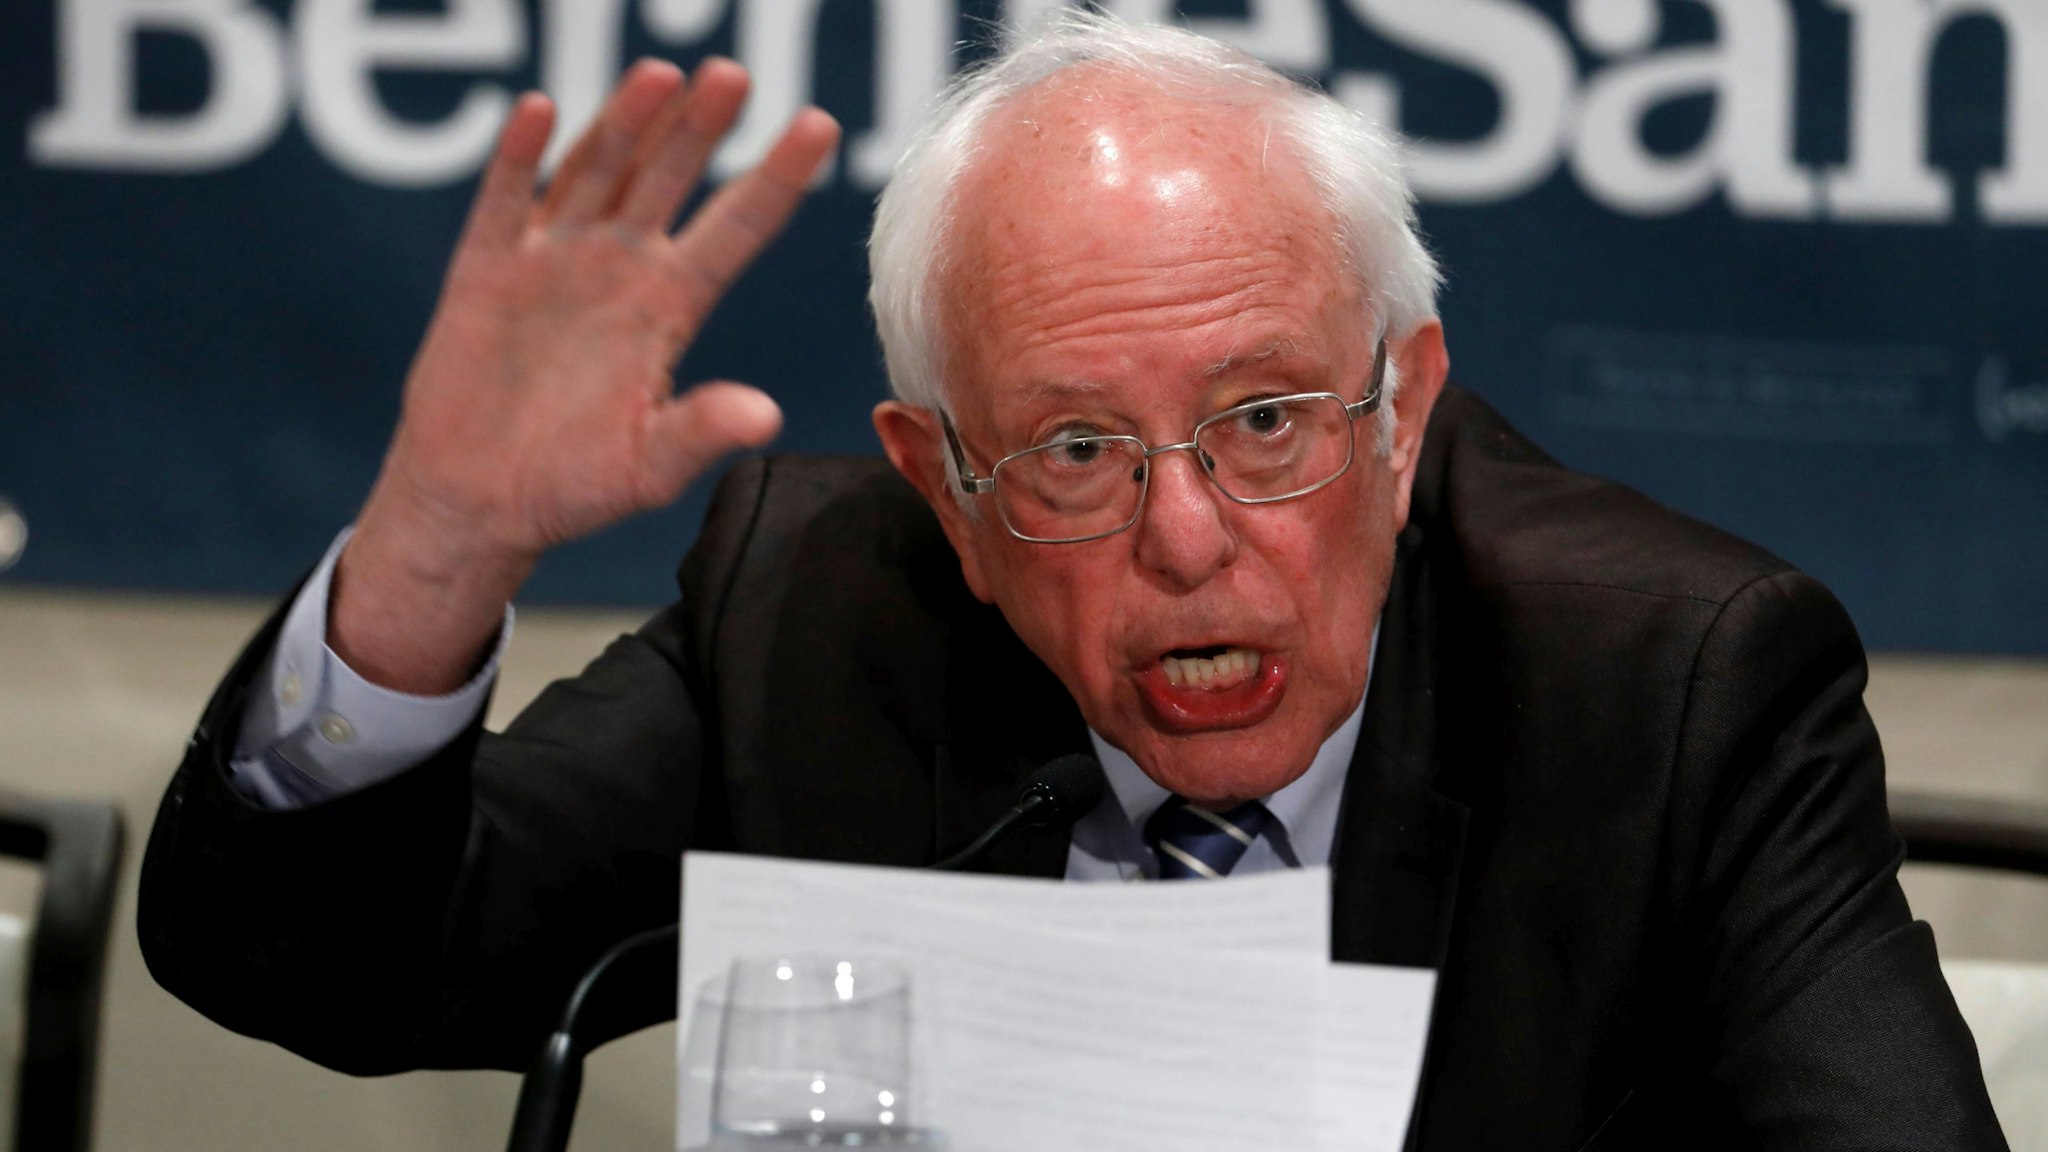 Democratic presidential hopeful Bernie Sanders speaks at a Coronavirus Public Health Roundtable at the Westin Detroit Metropolitan Airport in Romulus, Michigan, on March 9, 2020. - The United States has recorded at least 22 deaths from the coronavirus and 607 confirmed cases, according to a Johns Hopkins tally.